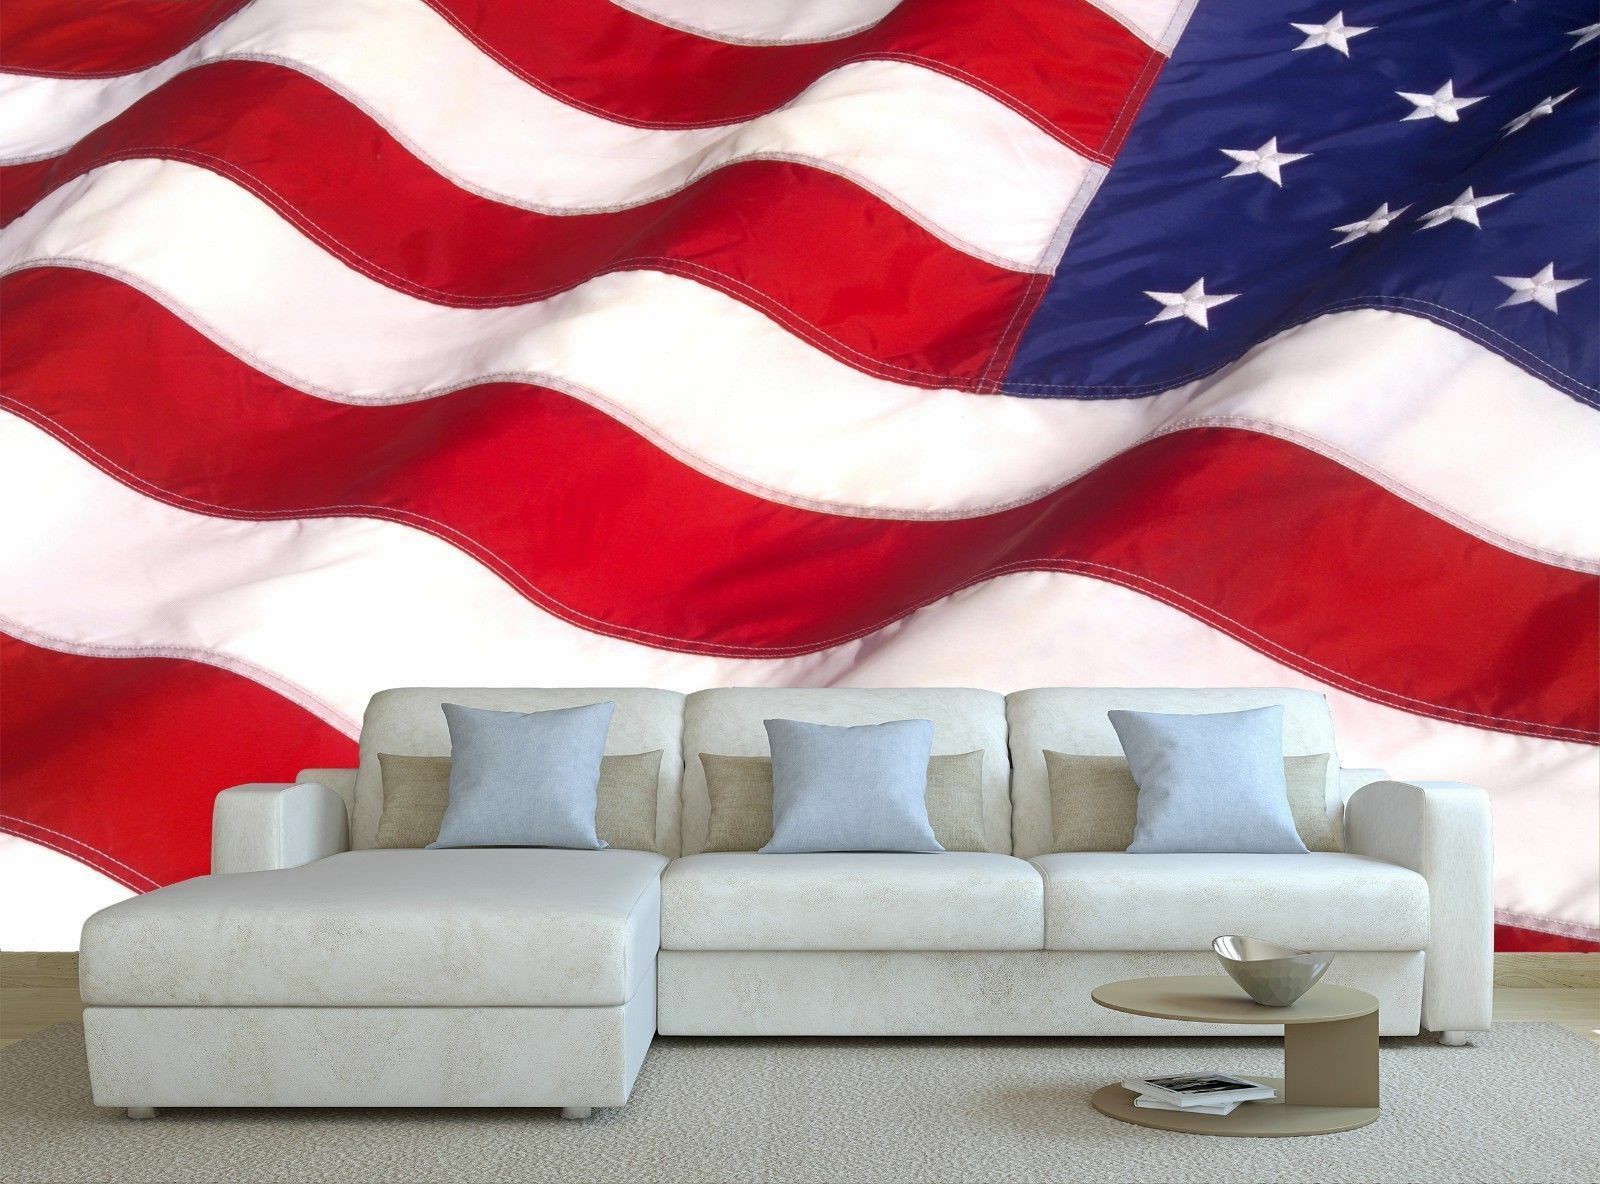 American Flag 3d Wall Decor With Fashionable Waving American Flag 3d Mural Photo Wallpaper Decor Large Paper Wall (View 7 of 20)